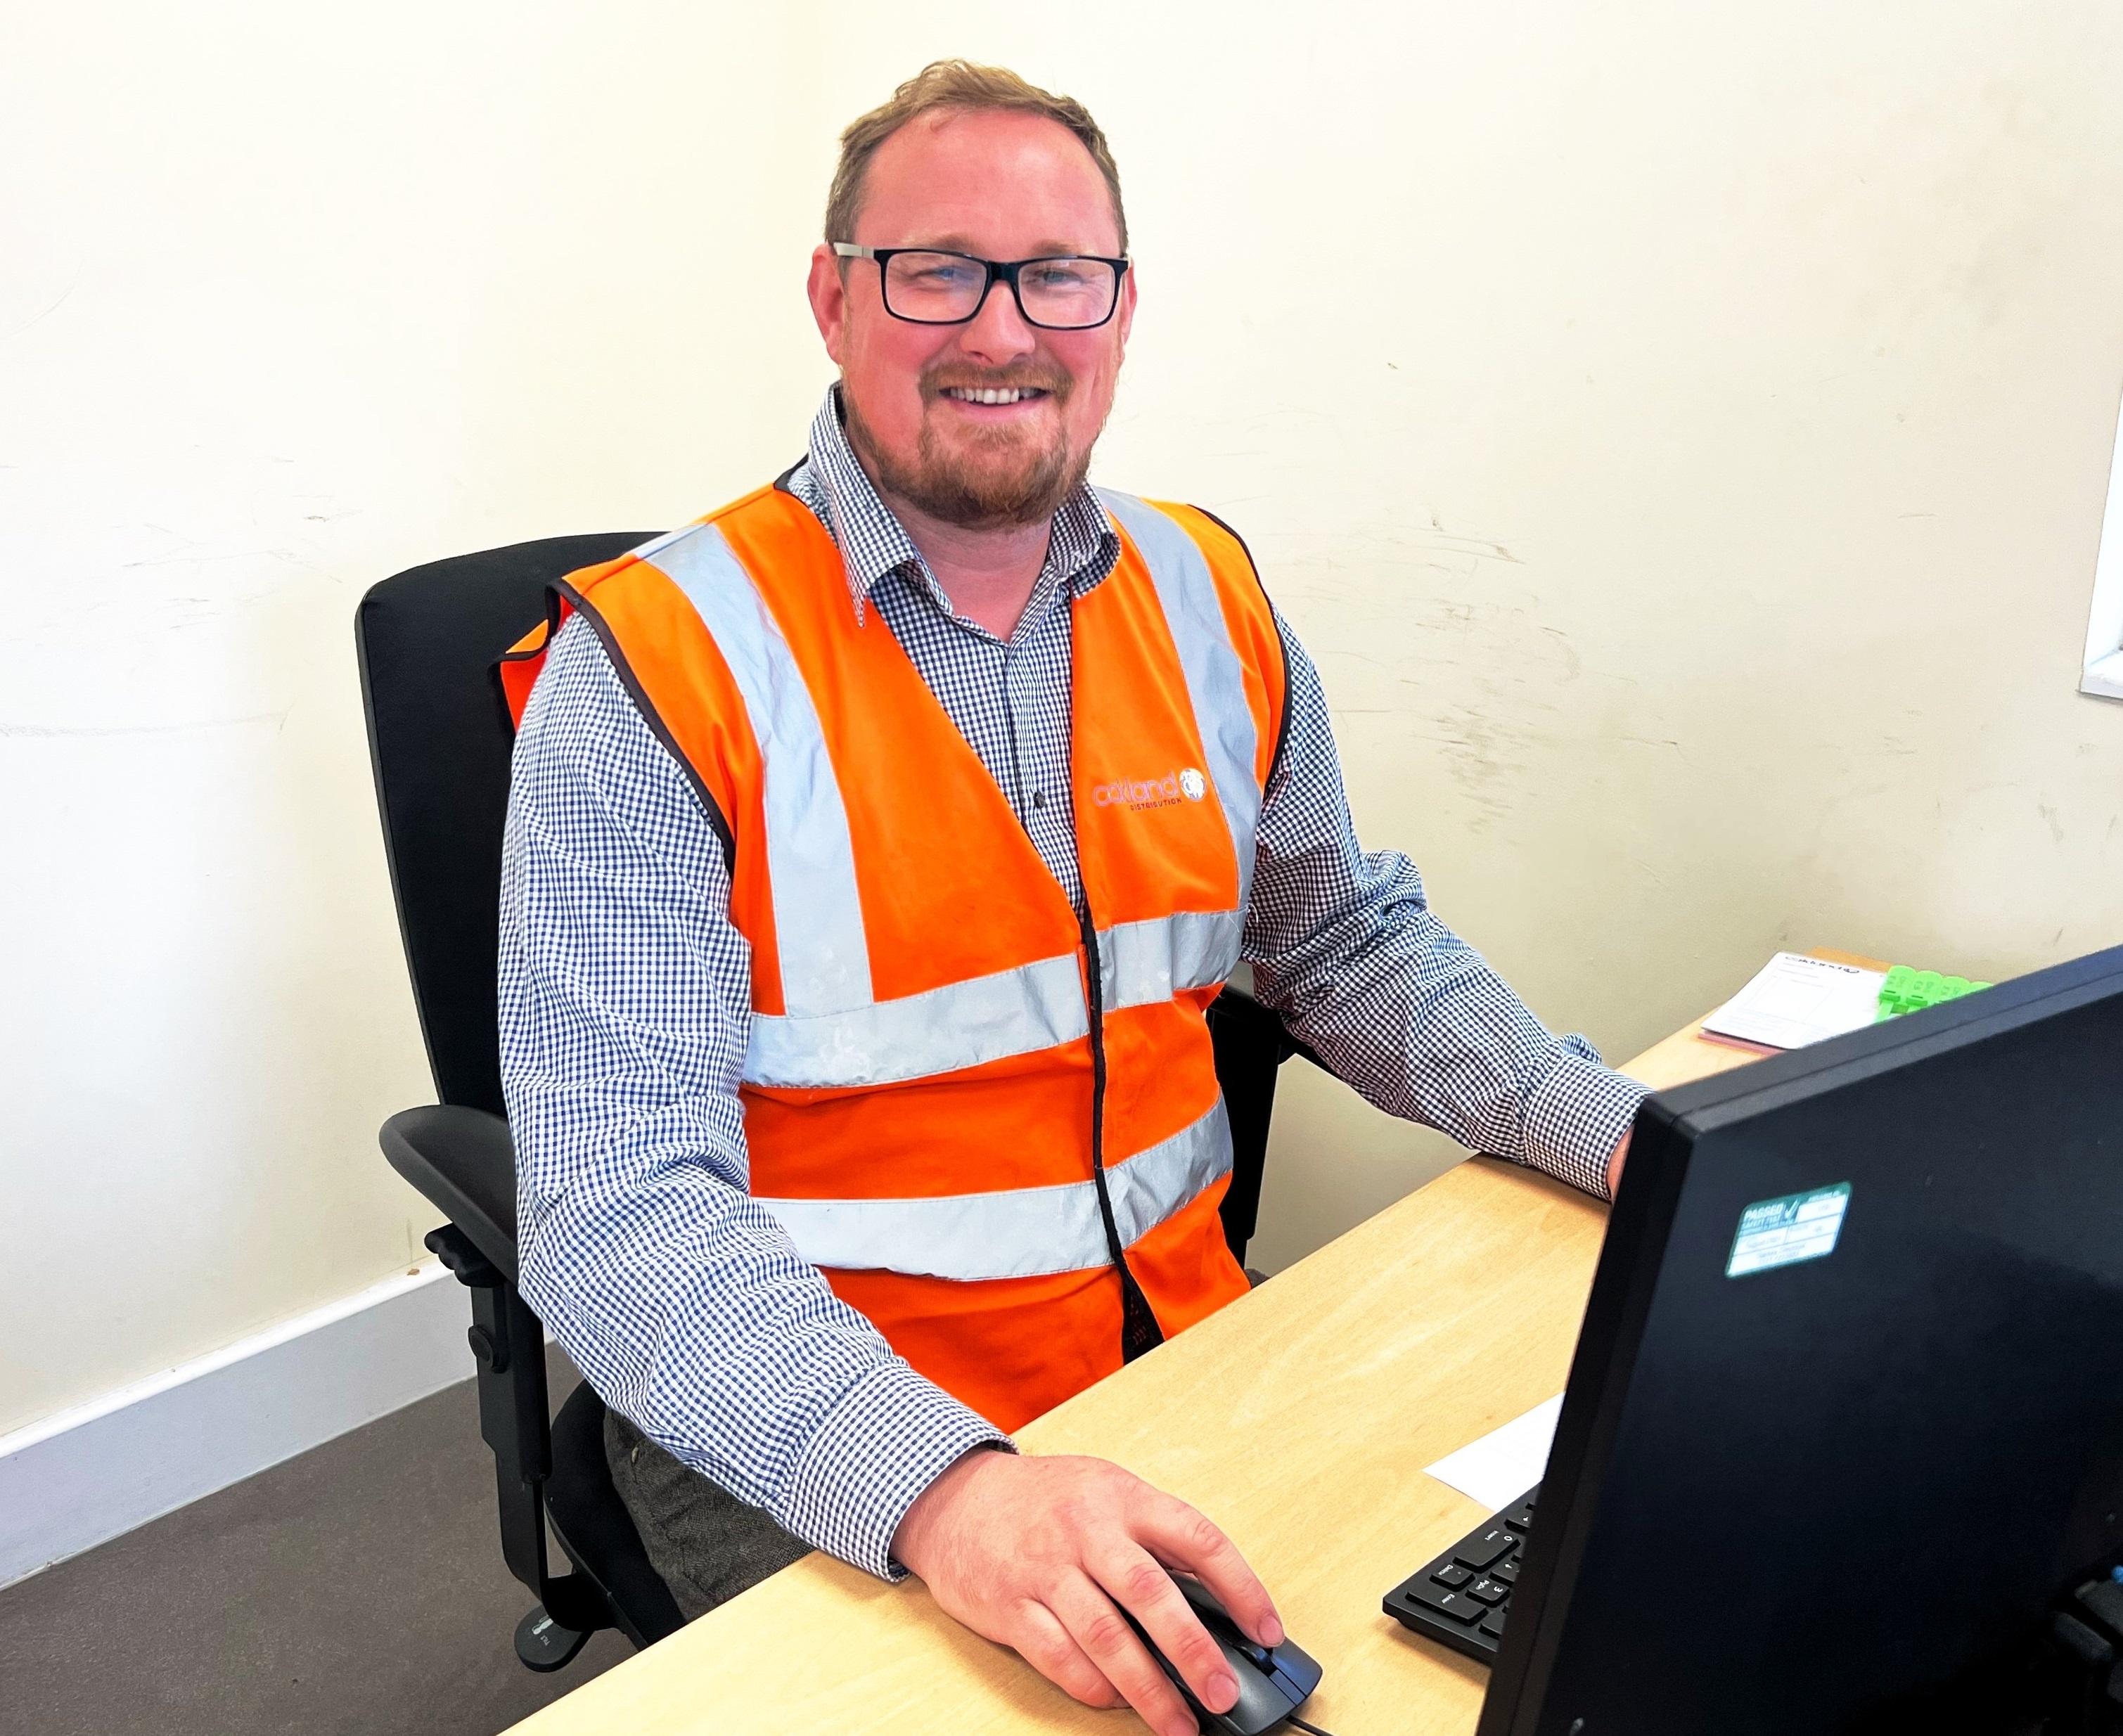 Promotion to Senior Shift Manager for Andy Parker at Oakland International